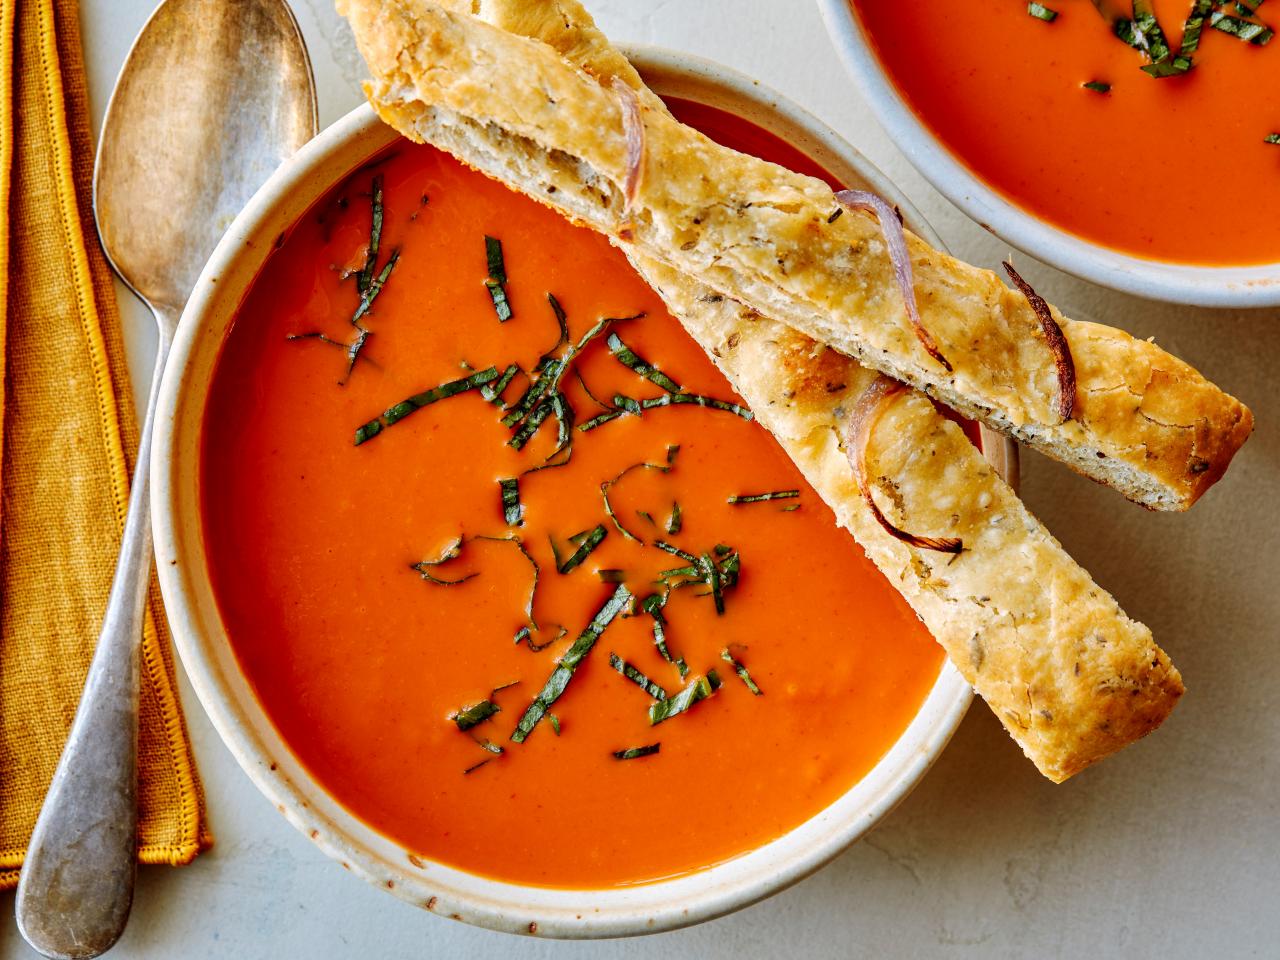 https://food.fnr.sndimg.com/content/dam/images/food/fullset/2023/2/24/FN_Sunny-Anderson_Roasted-Tomato-Soup_Herbed-Flatbread_s4x3.jpg.rend.hgtvcom.1280.960.suffix/1677268778123.jpeg